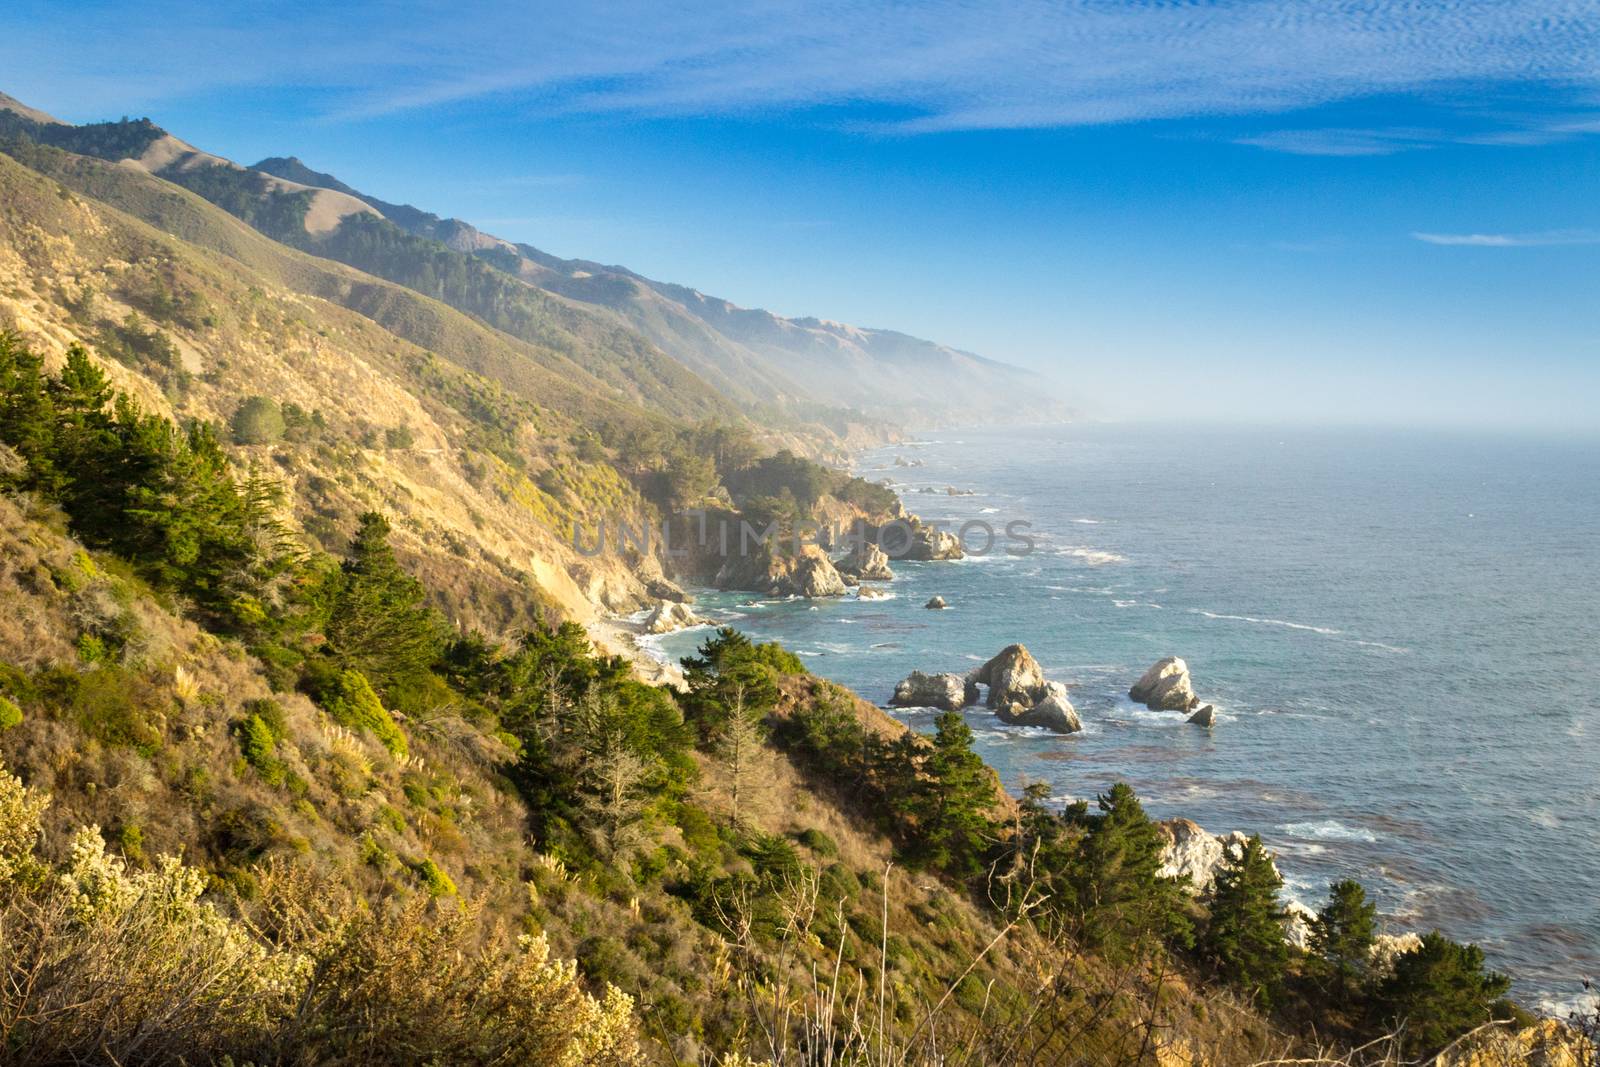 Coastal view of Big Sur landscape and scenery, with pacific ocean and rocks on the coastline during sunset.California, USA. Travel and tourism